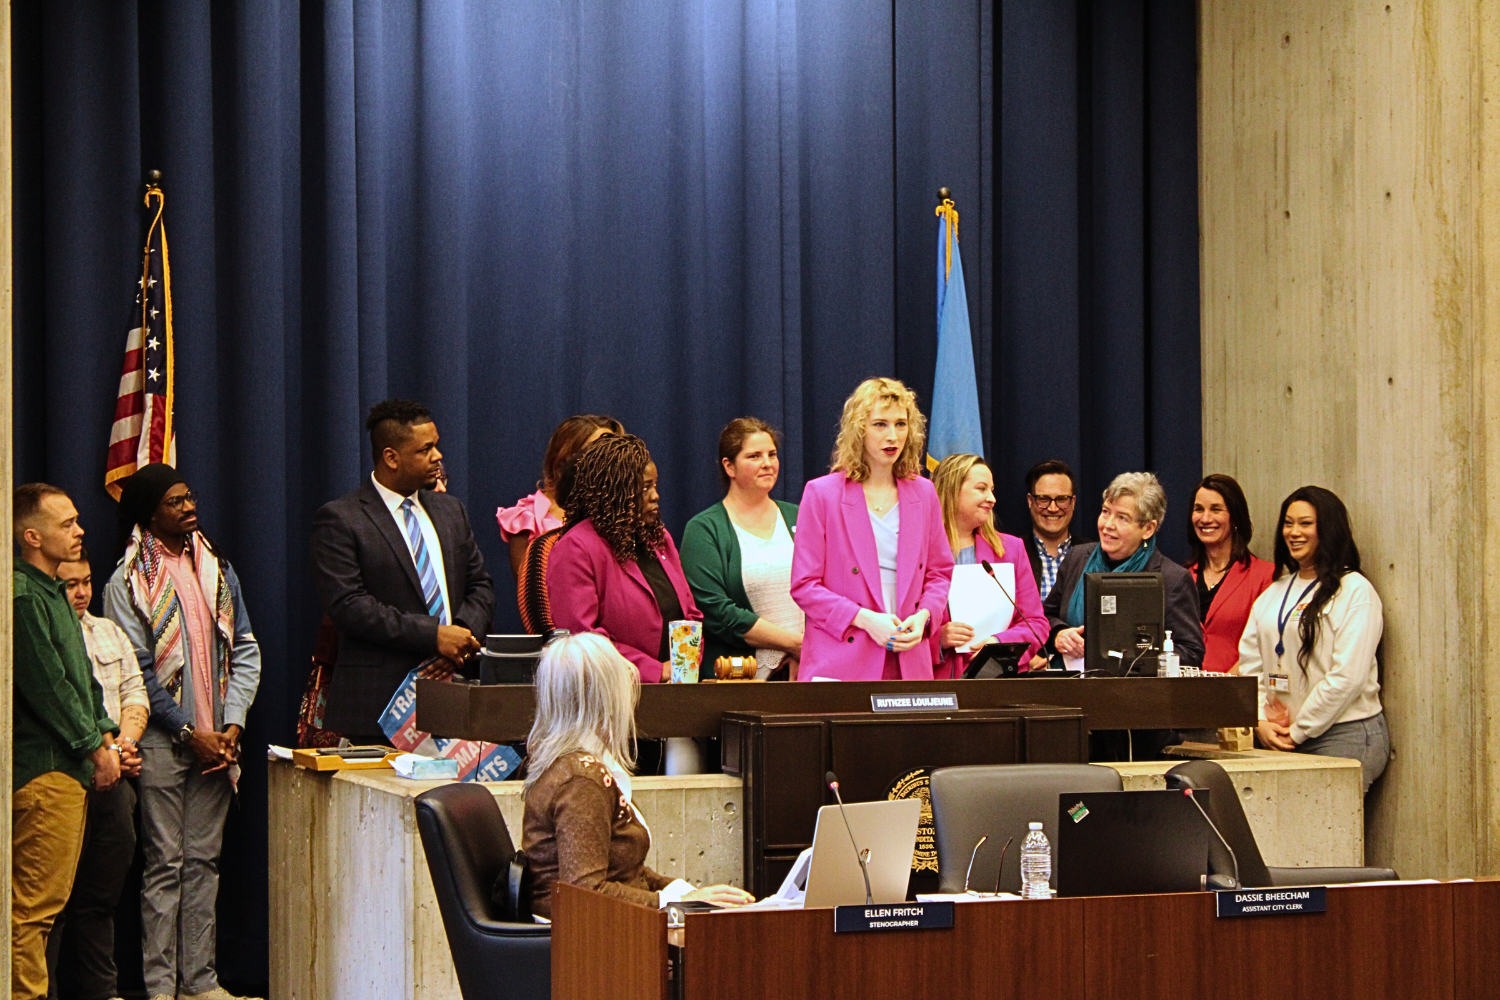 City+Council+commemorates+Transgender+Day+of+Visibility